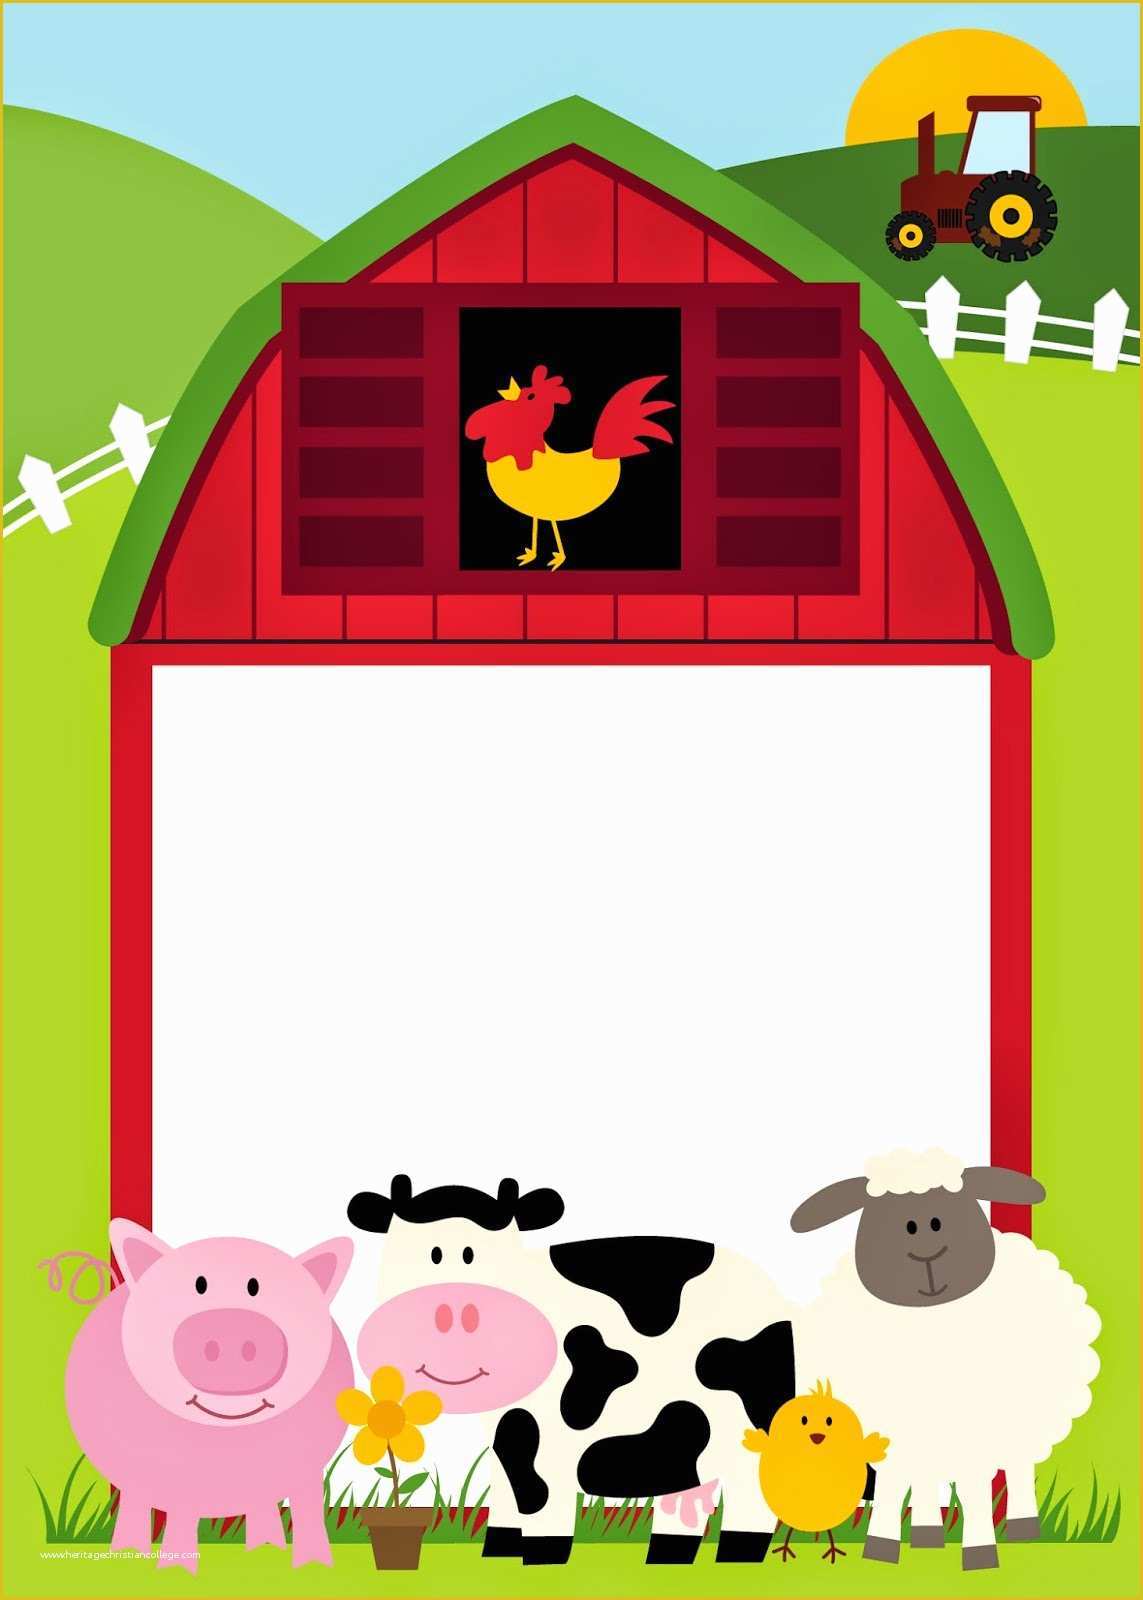 Free Farm Birthday Invitation Templates Of Barn Clipart Party Pencil and In Color Barn Clipart Party